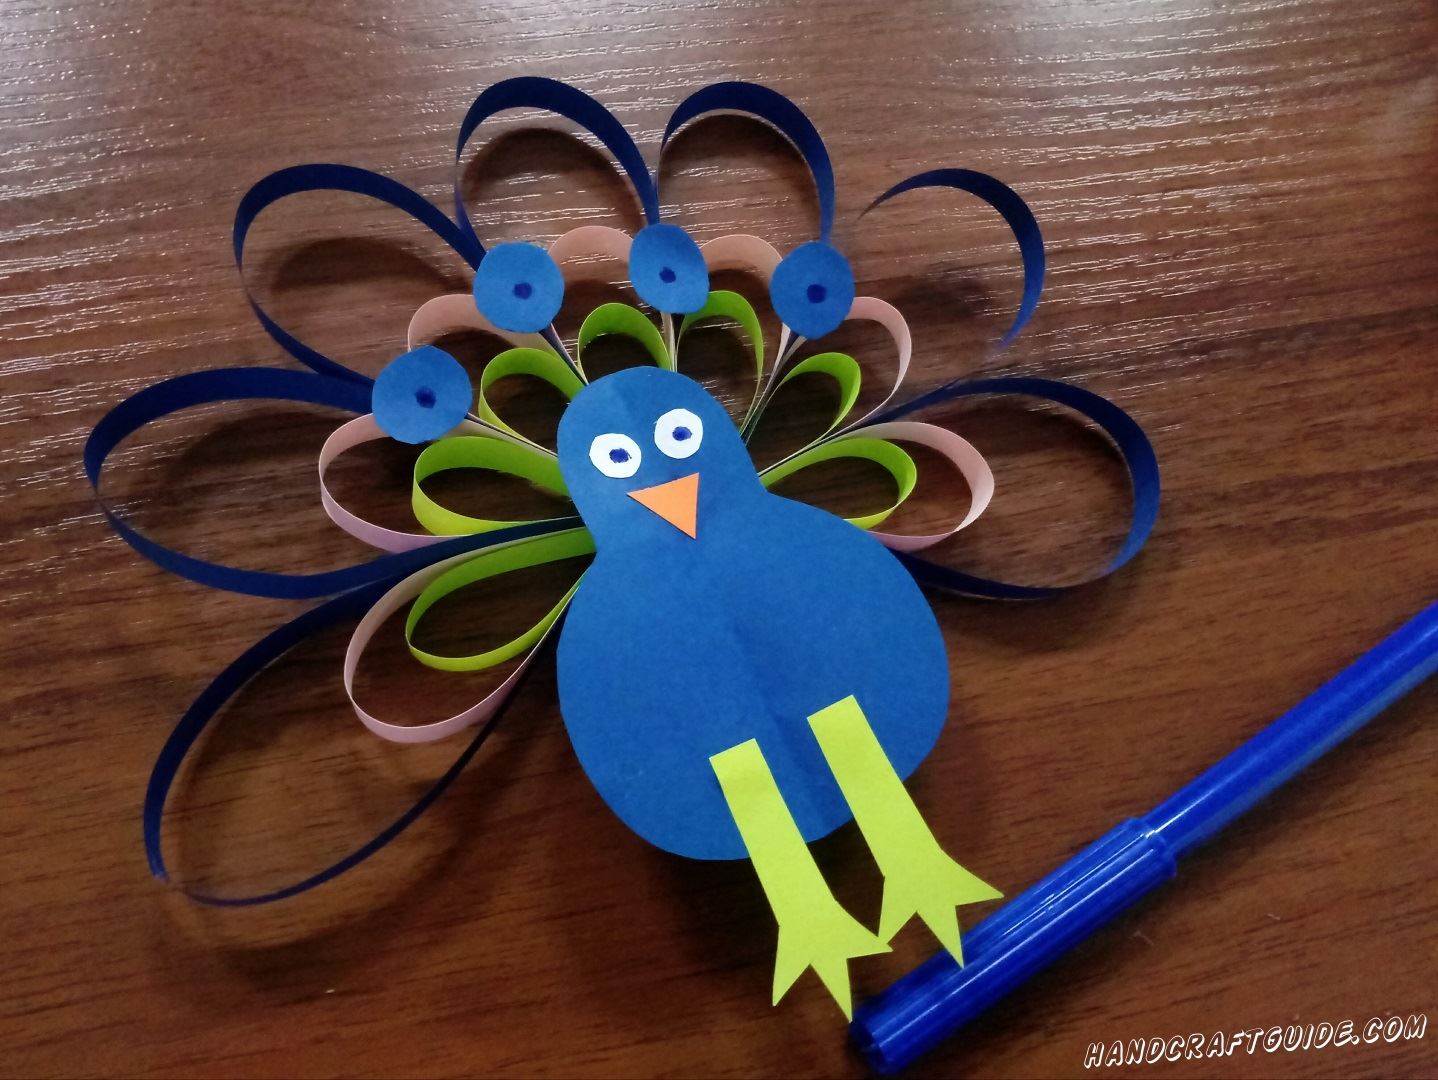 Download Peacock - Paper crafts, Birds, for 8 years kids | HandCraftGuide